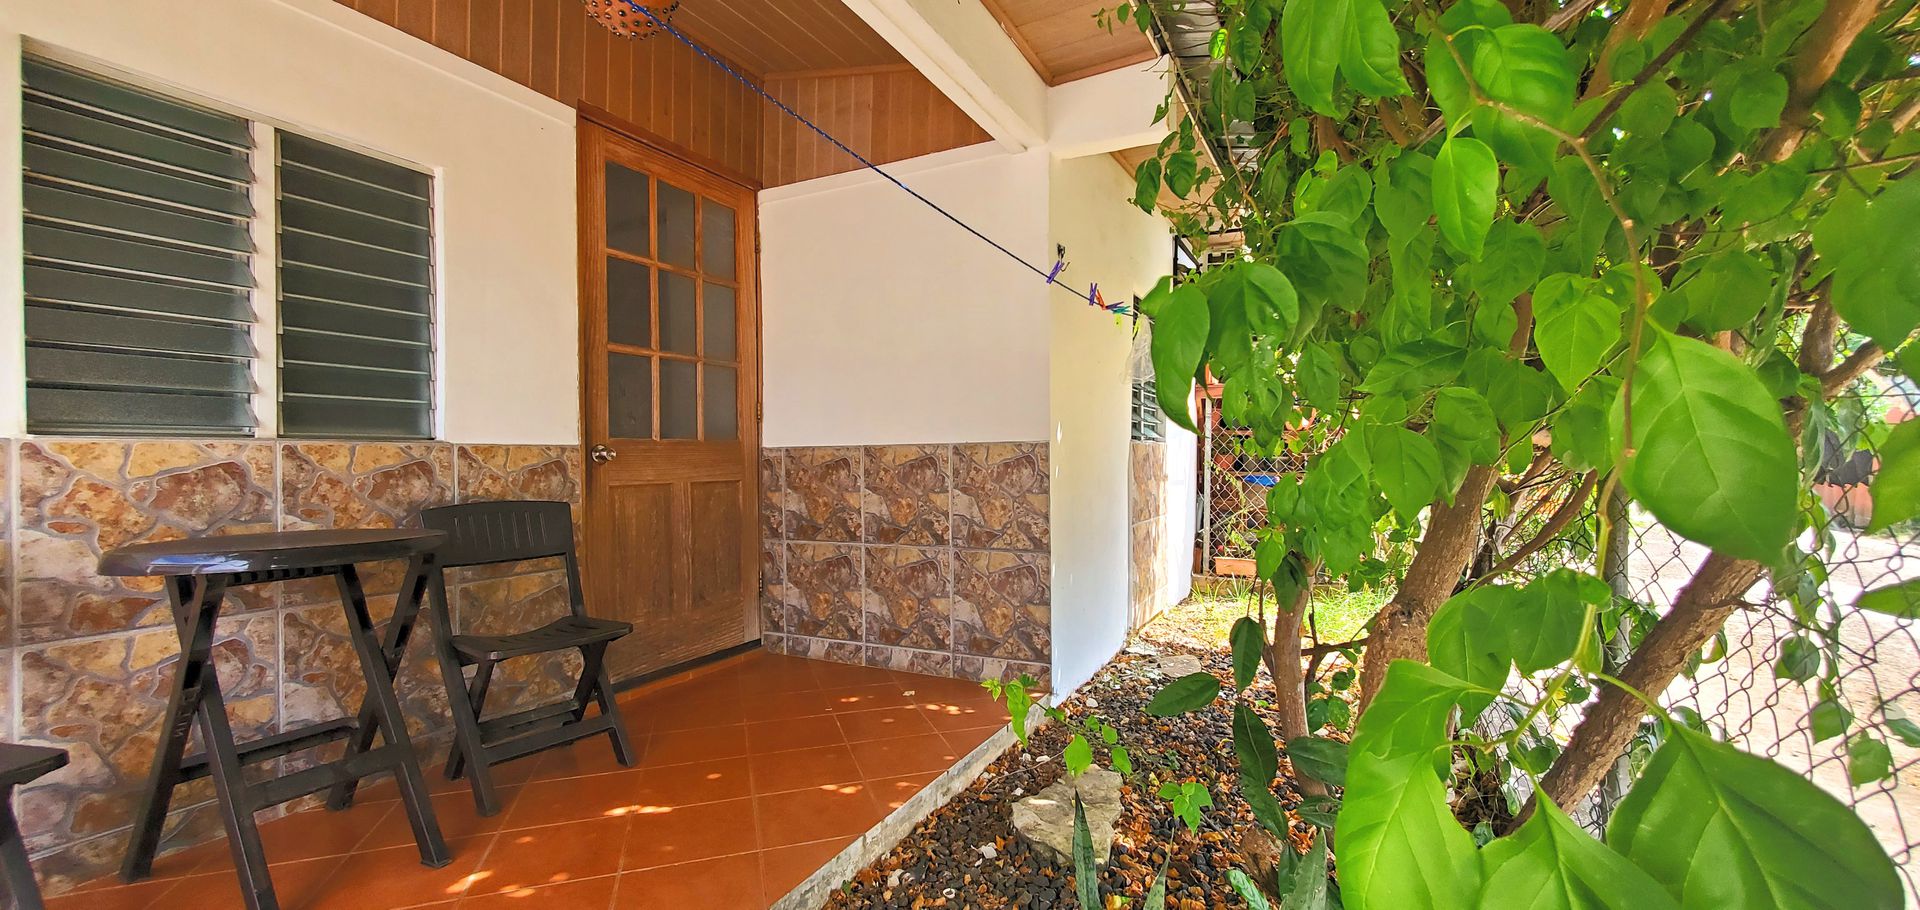 3-Bedroom House in Pedasi, Panama - Income Property with Owner Financing - Property ID PLS-18562